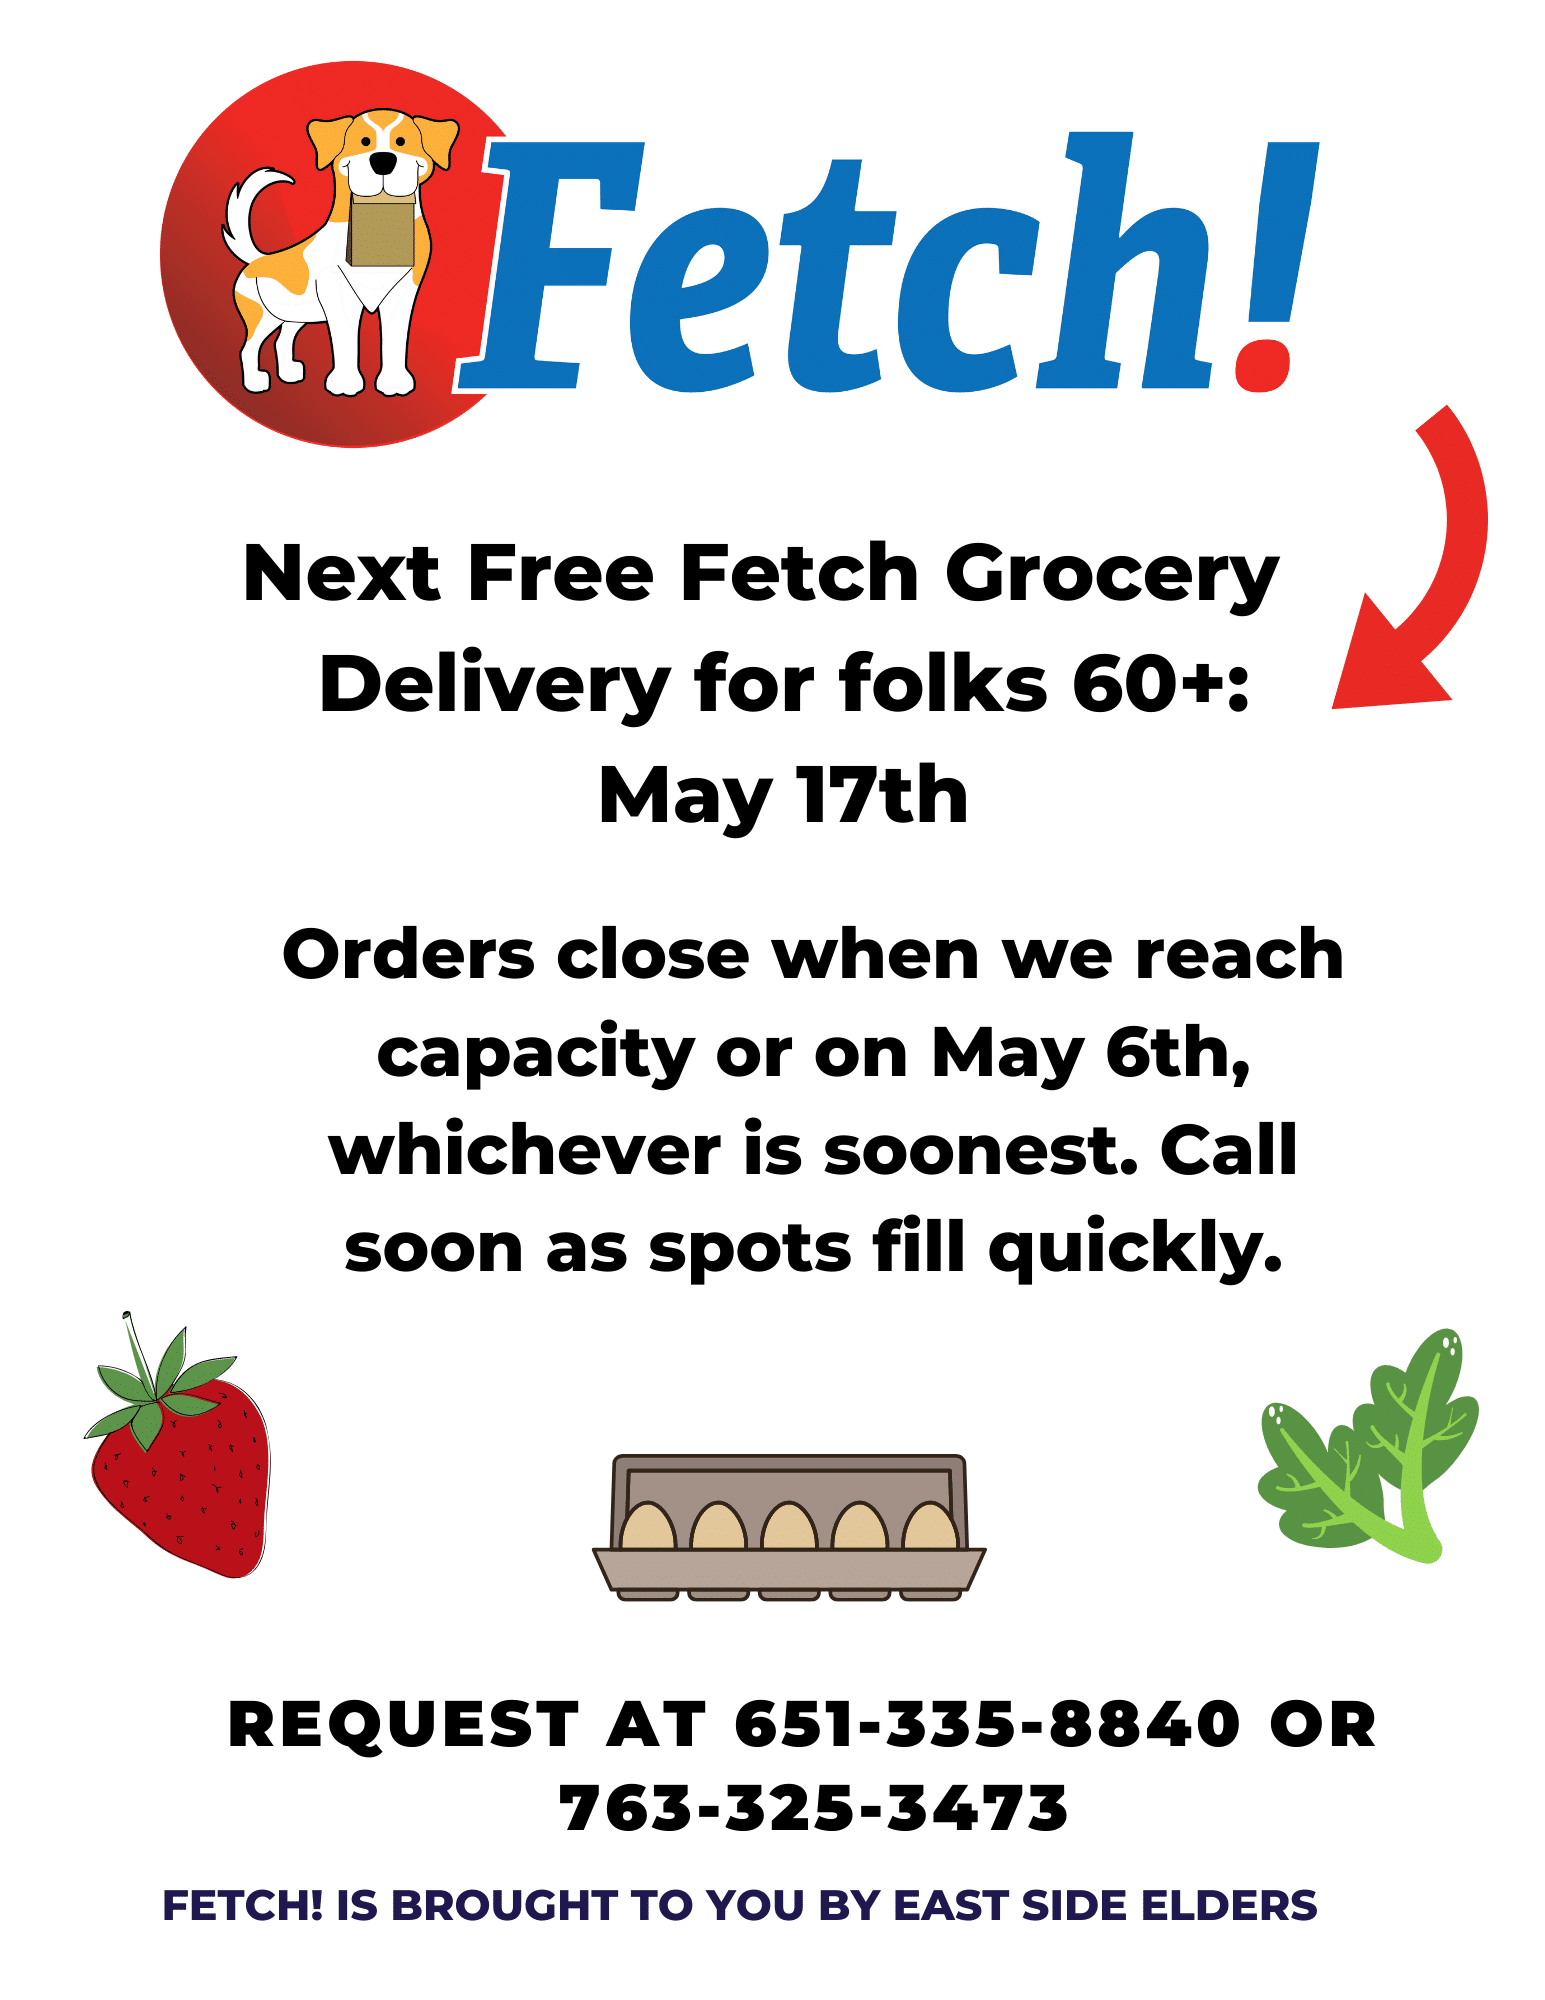 Flyer for the May 17th Fetch! grocery delivery. Features illustrative images of a strawberry, eggs, and greens. Logo for the program includes a yellow and white dog holding a paper bag. Text: Fetch! Next Free Fetch Grocery Delivery for folks 60+: May 17th. Orders close when we reach capacity or on May 6th, whichever is soonest. Call soon as spots fill quickly. Request at 651-335-8840 or 763-325-3473. Fetch! is brought to you by East Side Elders.